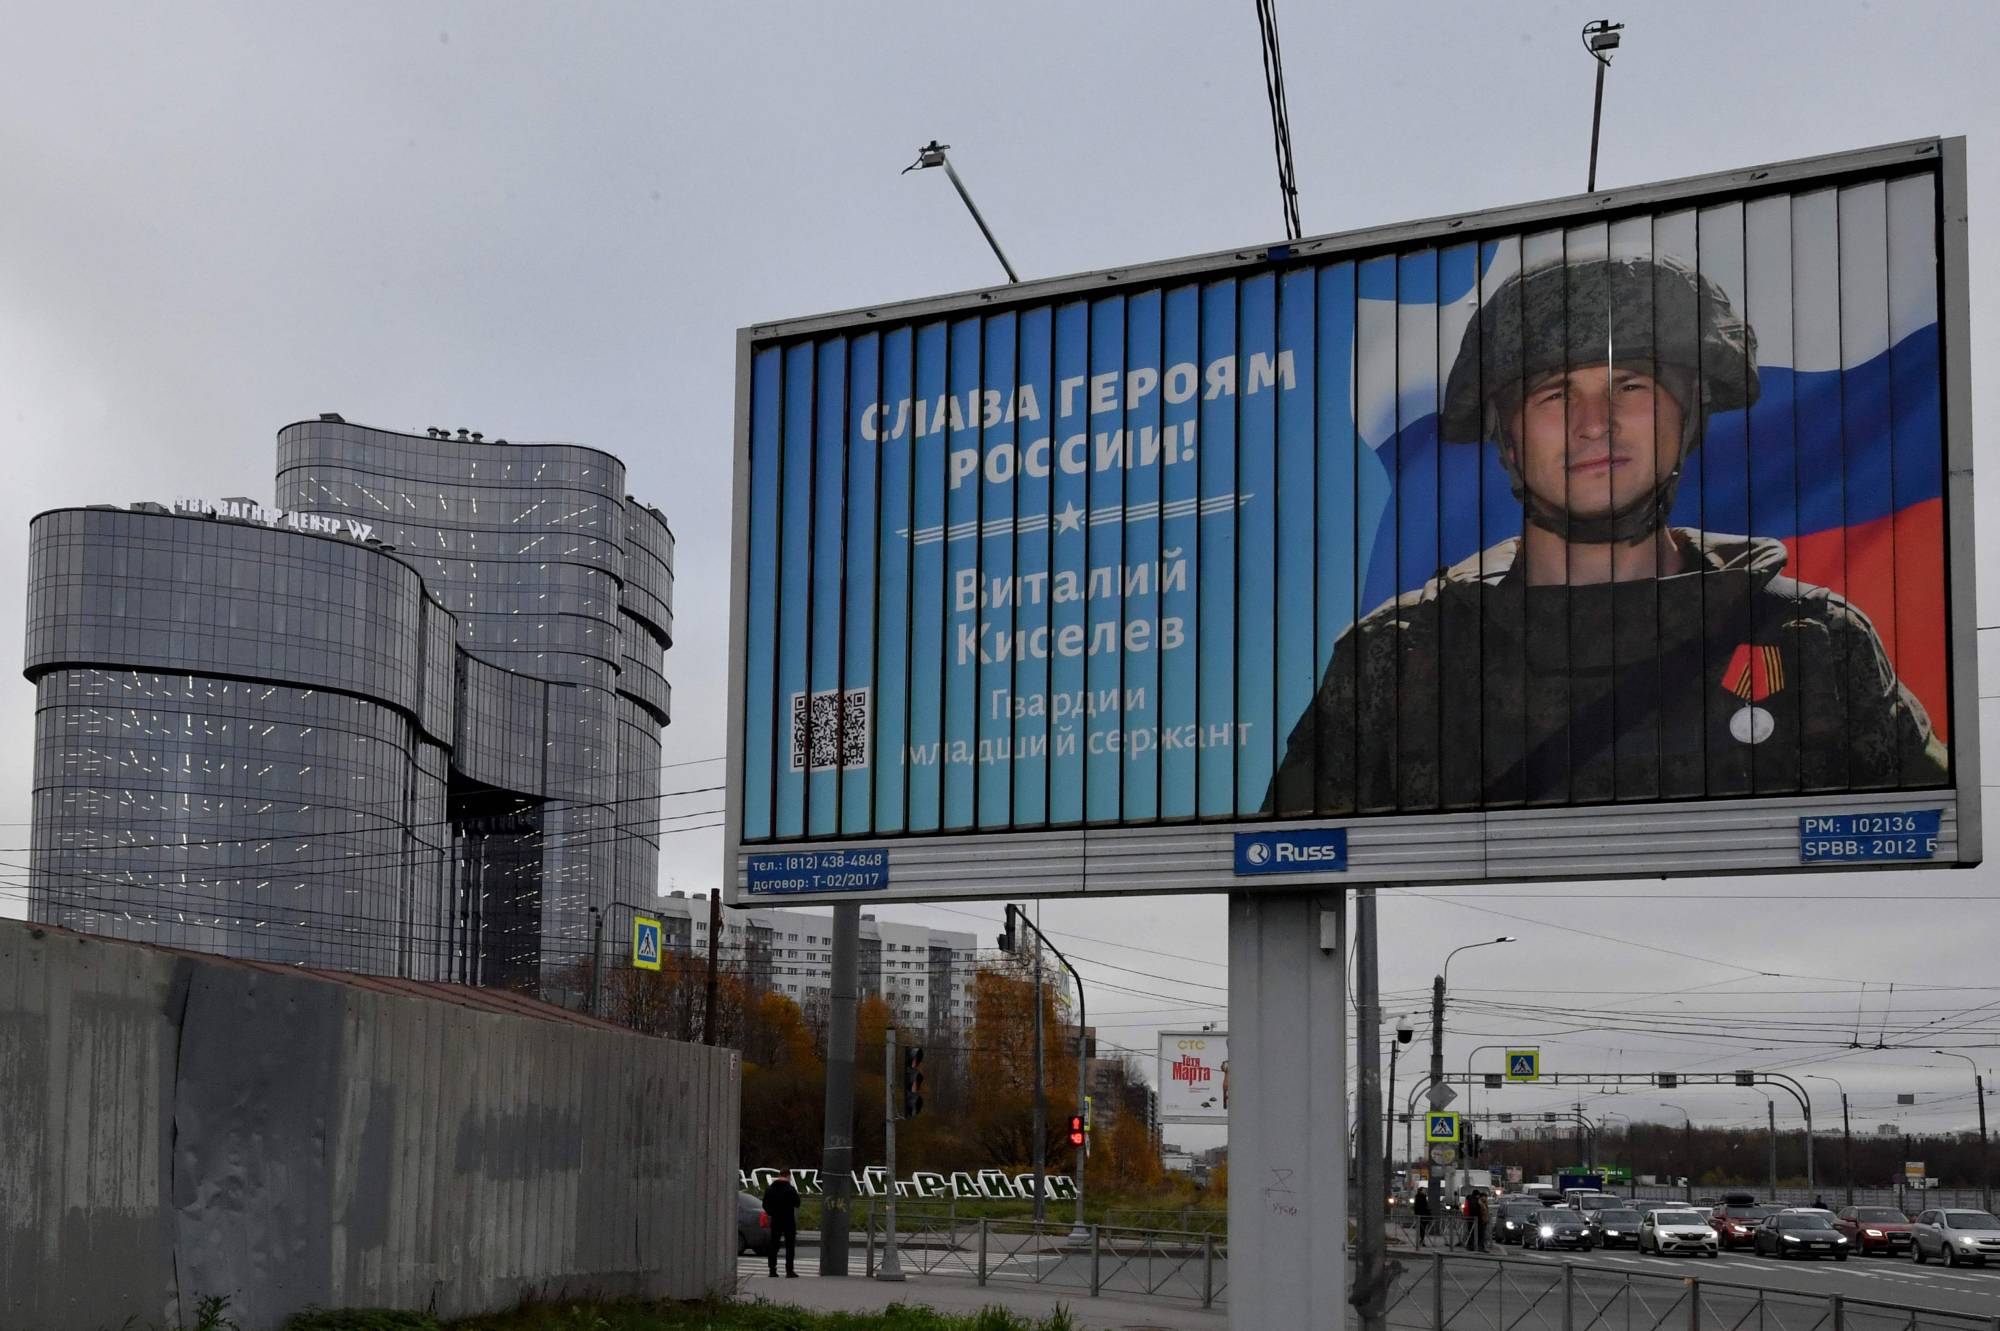 A poster displaying a Russian soldier with a slogan reading "Glory to the Heroes of Russia" is seen on a street side near the PMC Wagner Center